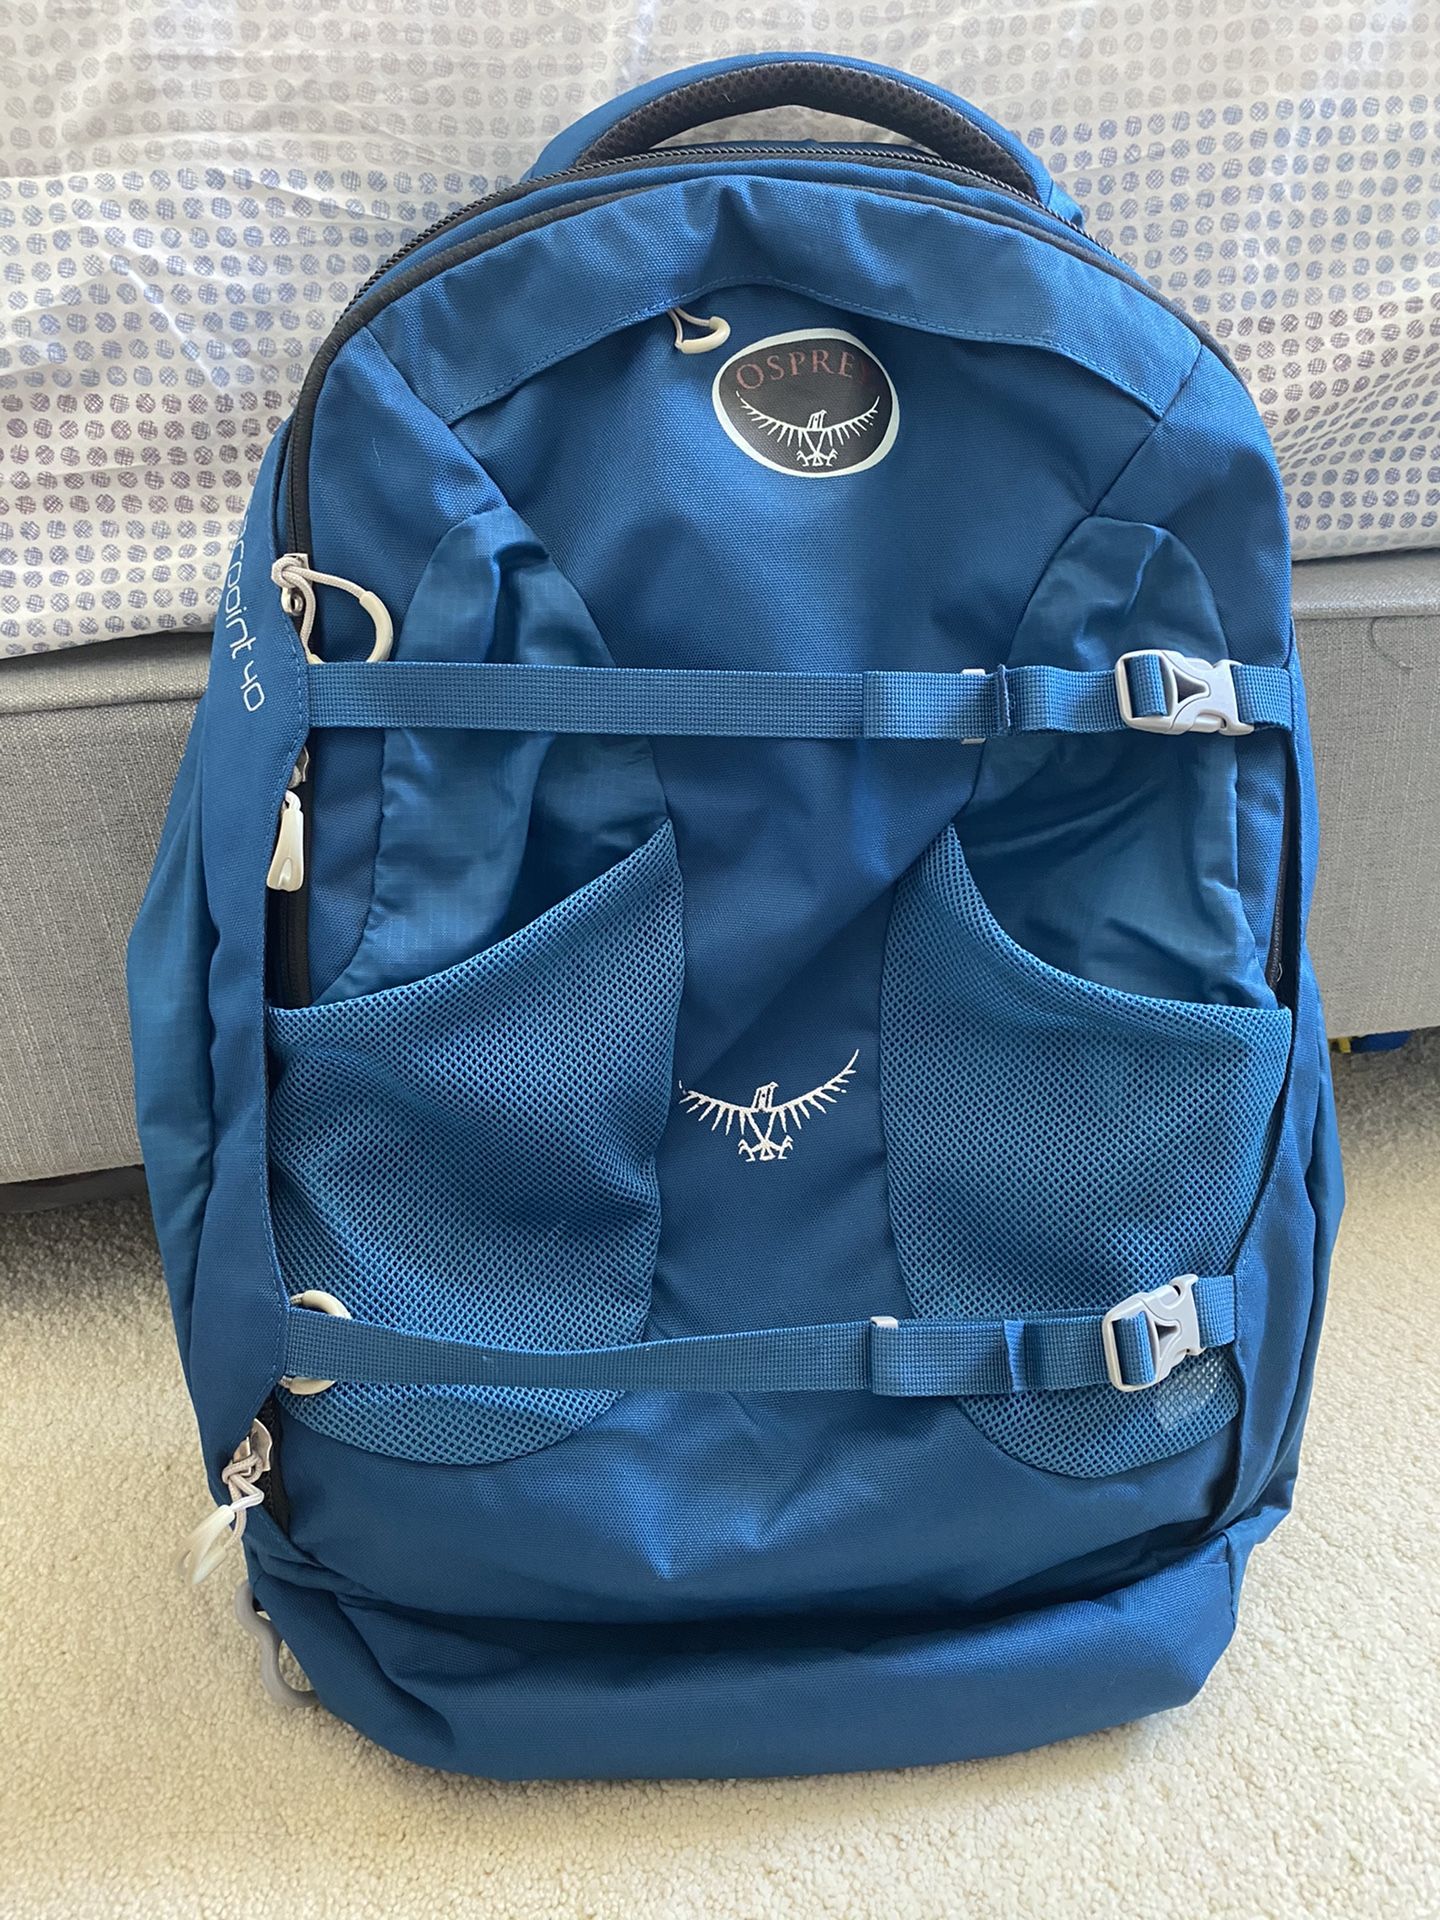 Osprey Fairpoint 40 luggage backpack